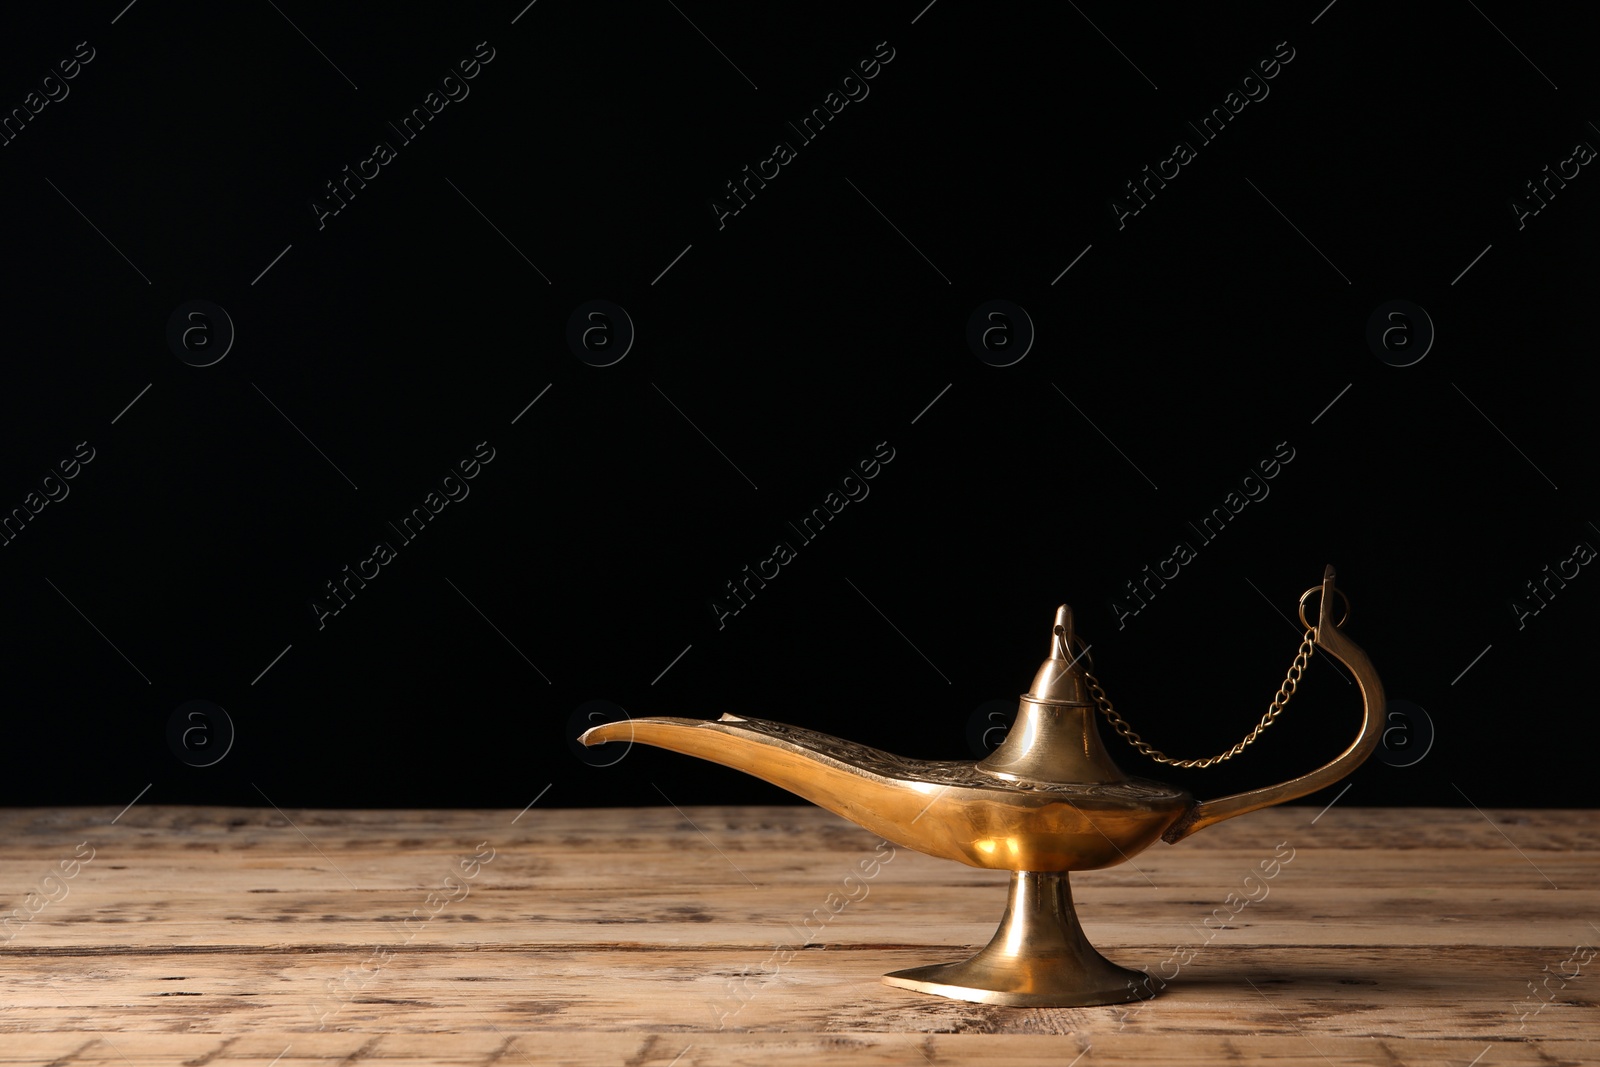 Photo of Aladdin lamp of wishes on wooden table against black background